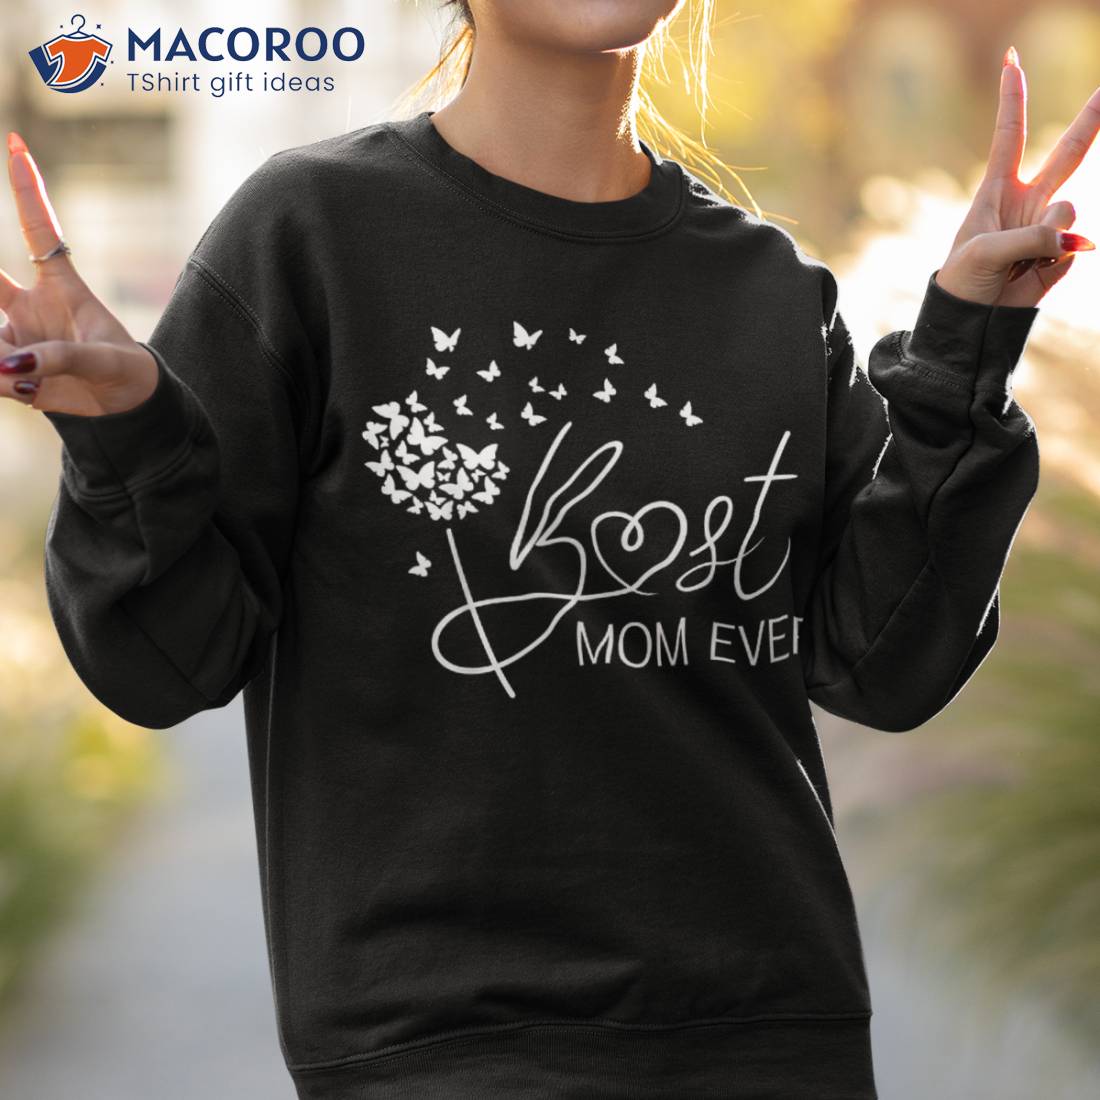 https://images.macoroo.com/wp-content/uploads/2023/04/mothers-day-best-mom-ever-gifts-from-daughter-son-kids-shirt-sweatshirt-2.jpg